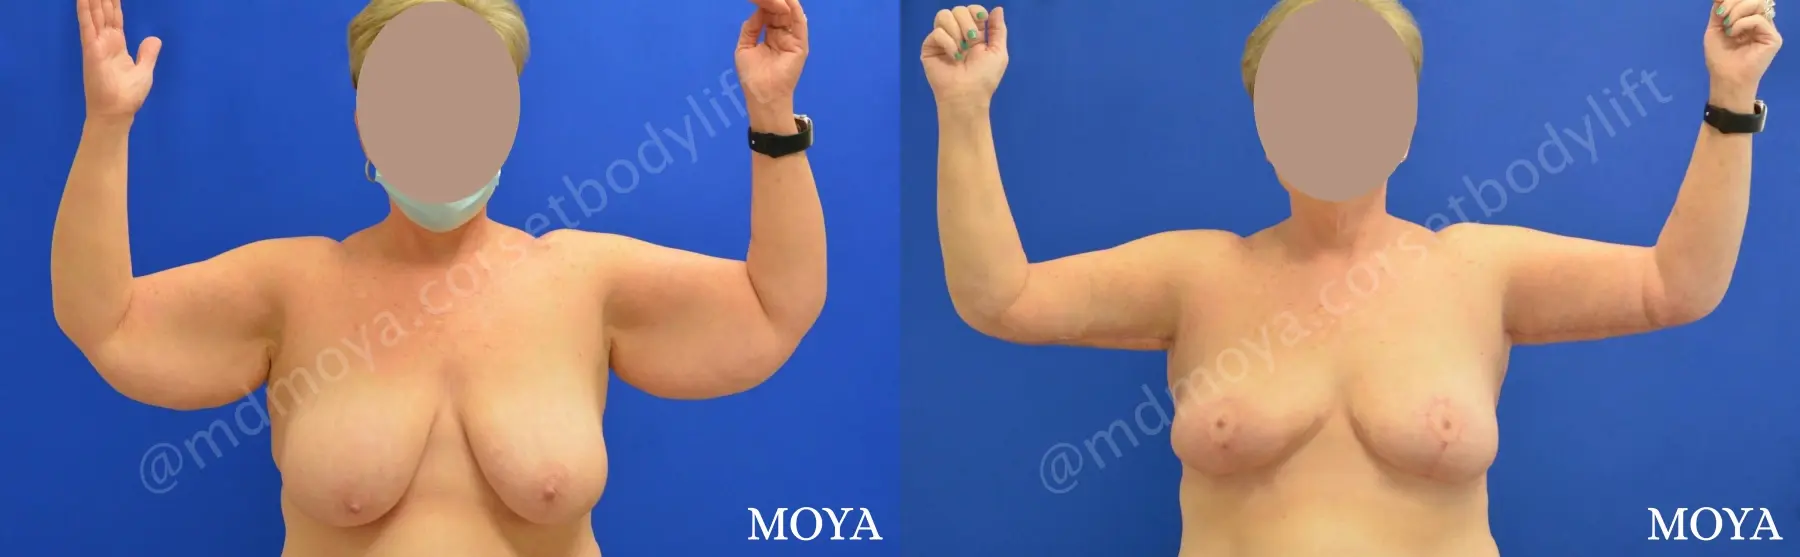 Upper Body Lift without Implants - Before and After 1